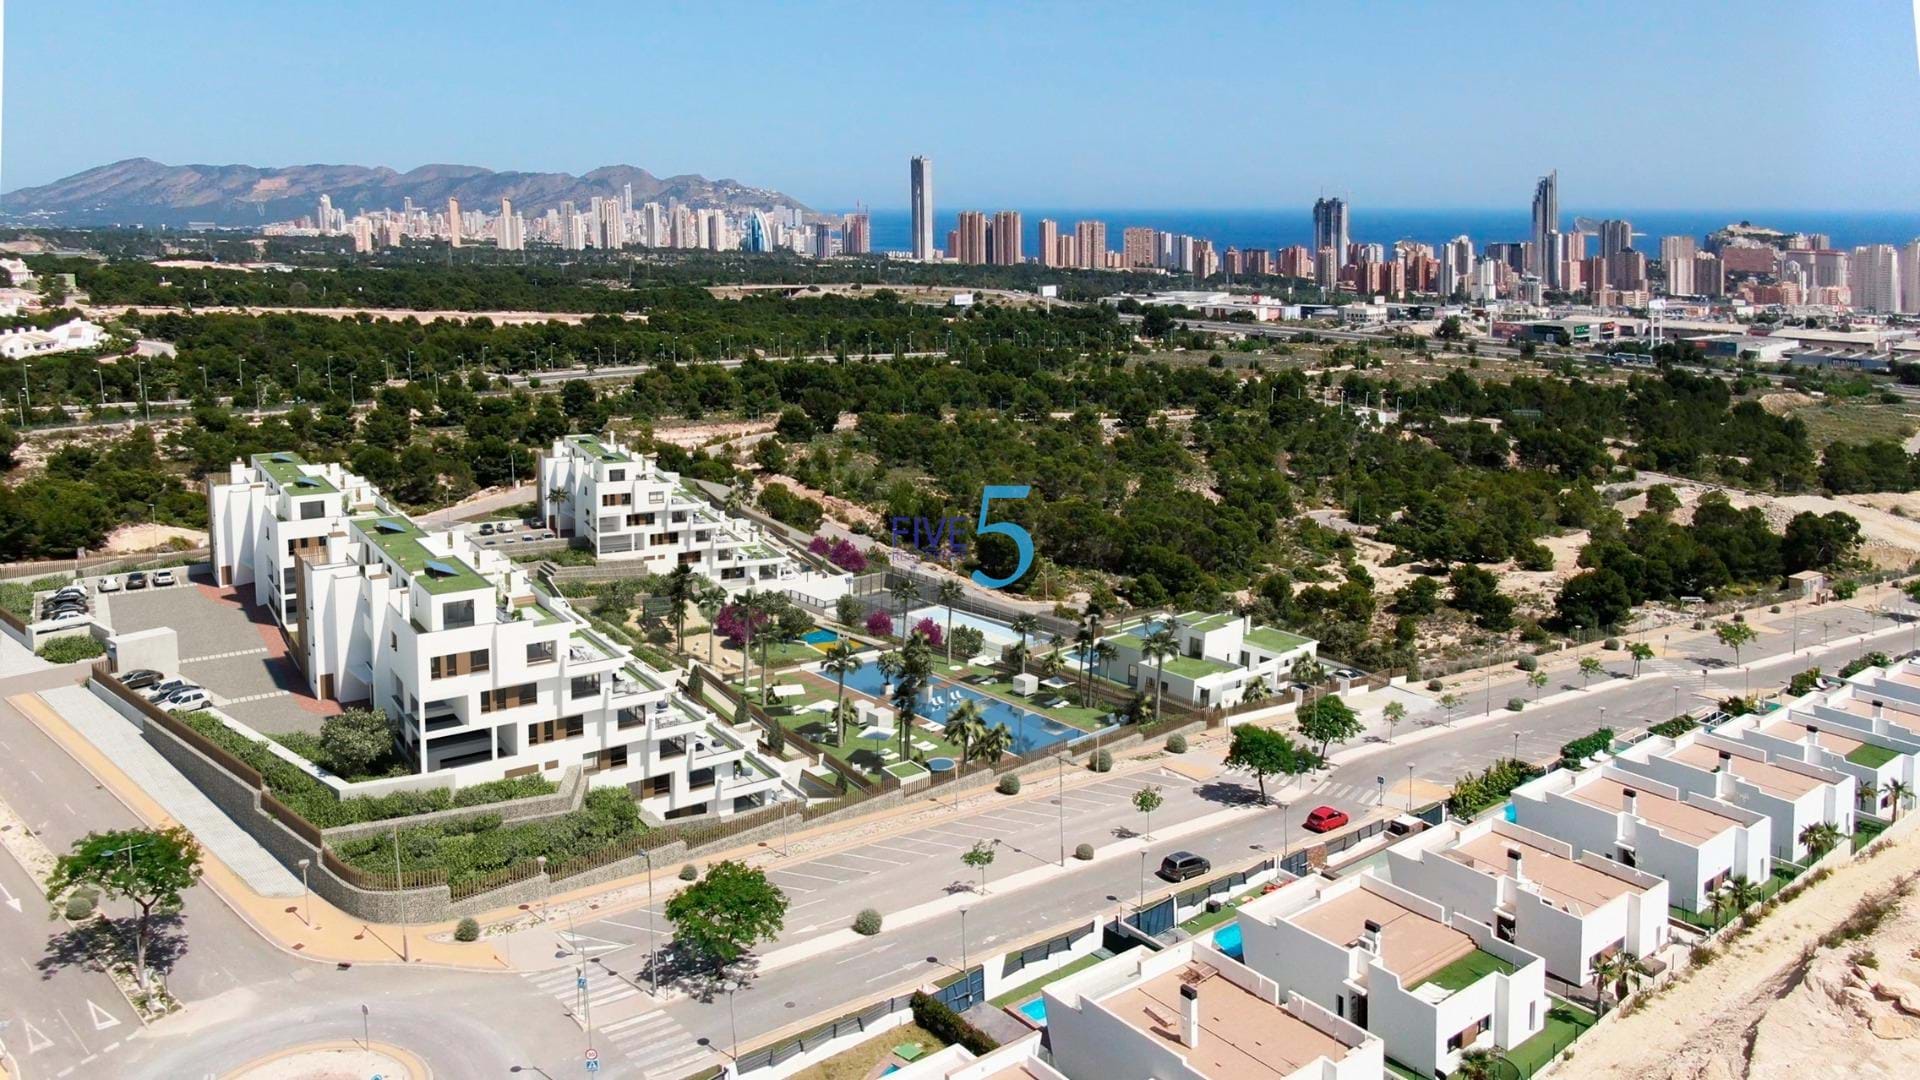 Apartment for sale in Benidorm 6